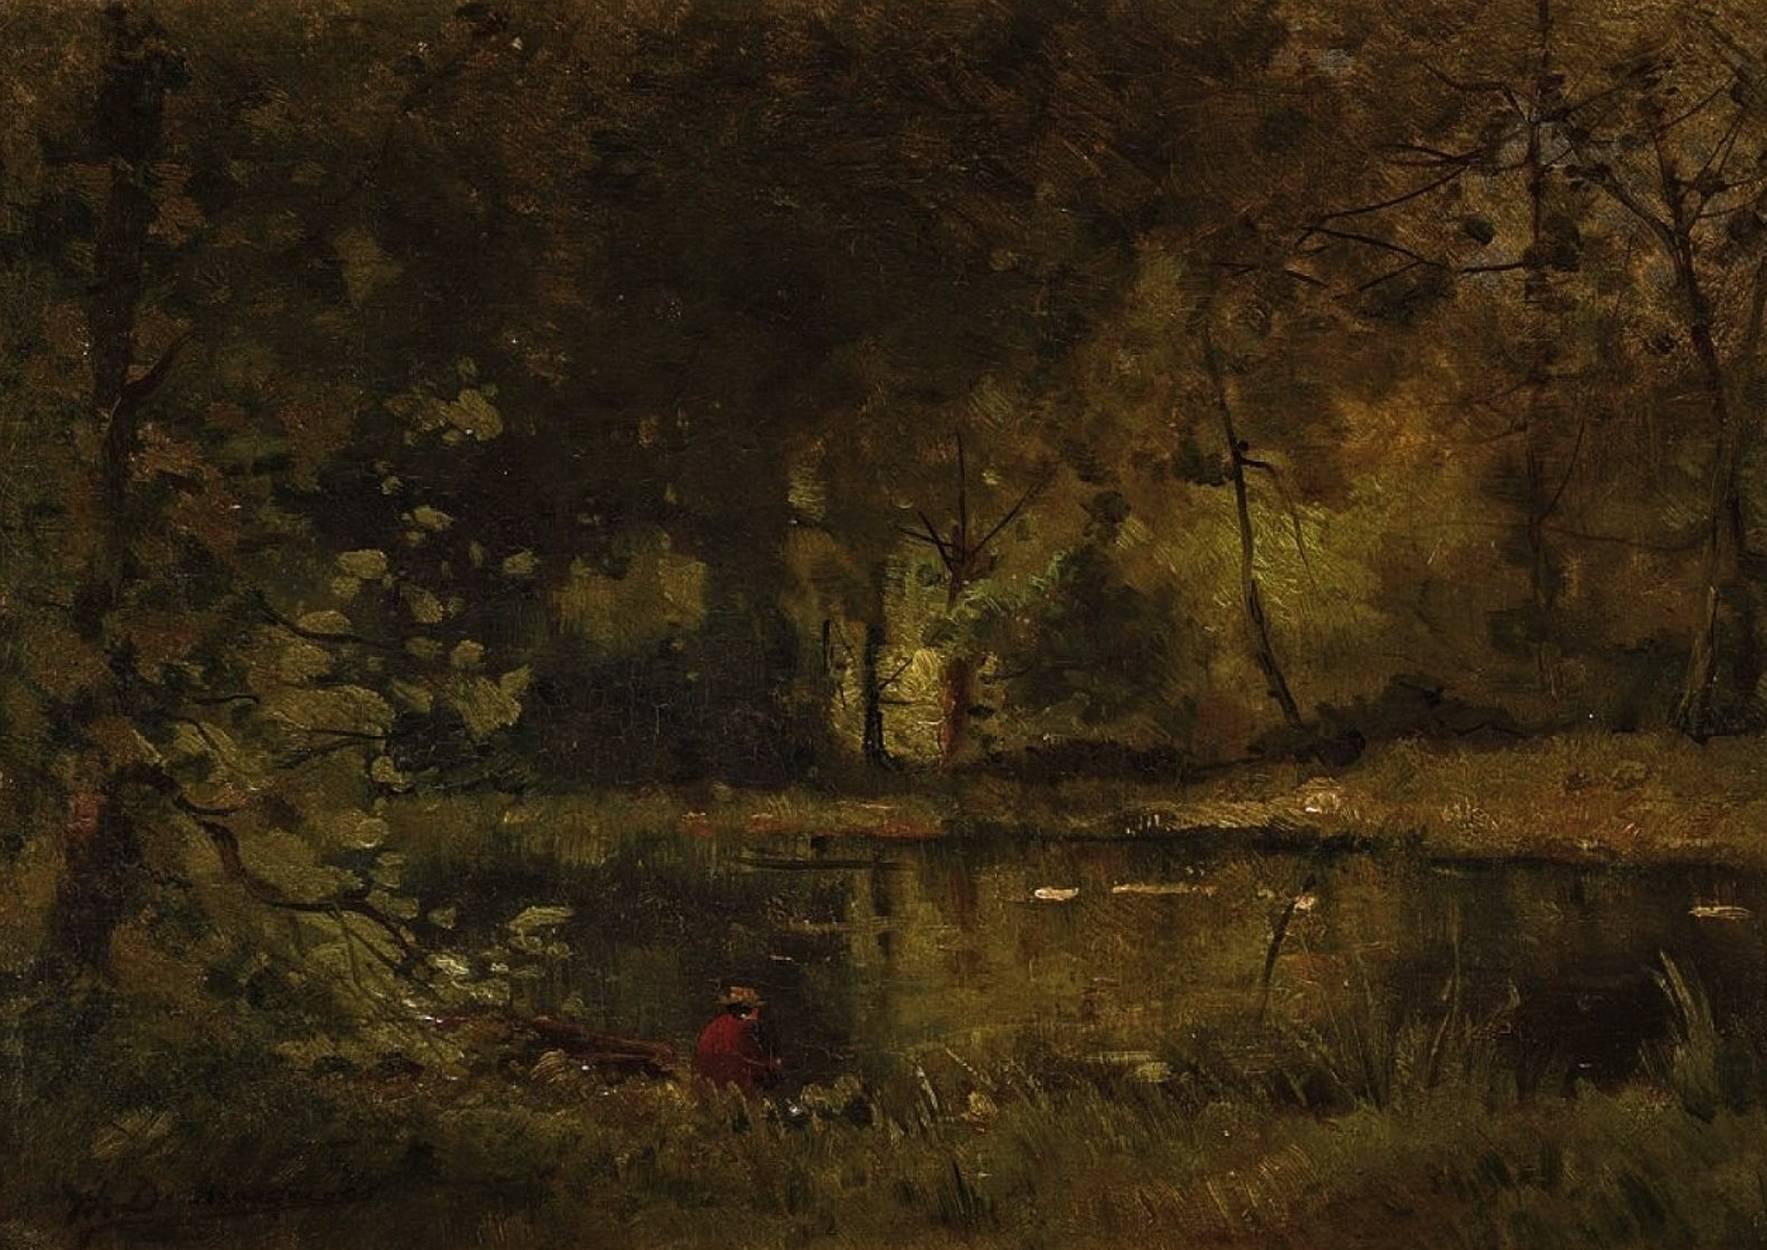 Patient angler sitting by the pond in the forest of Fontainebleau, near Barbizon - Painting by Charles Hippolyte Desmarquais